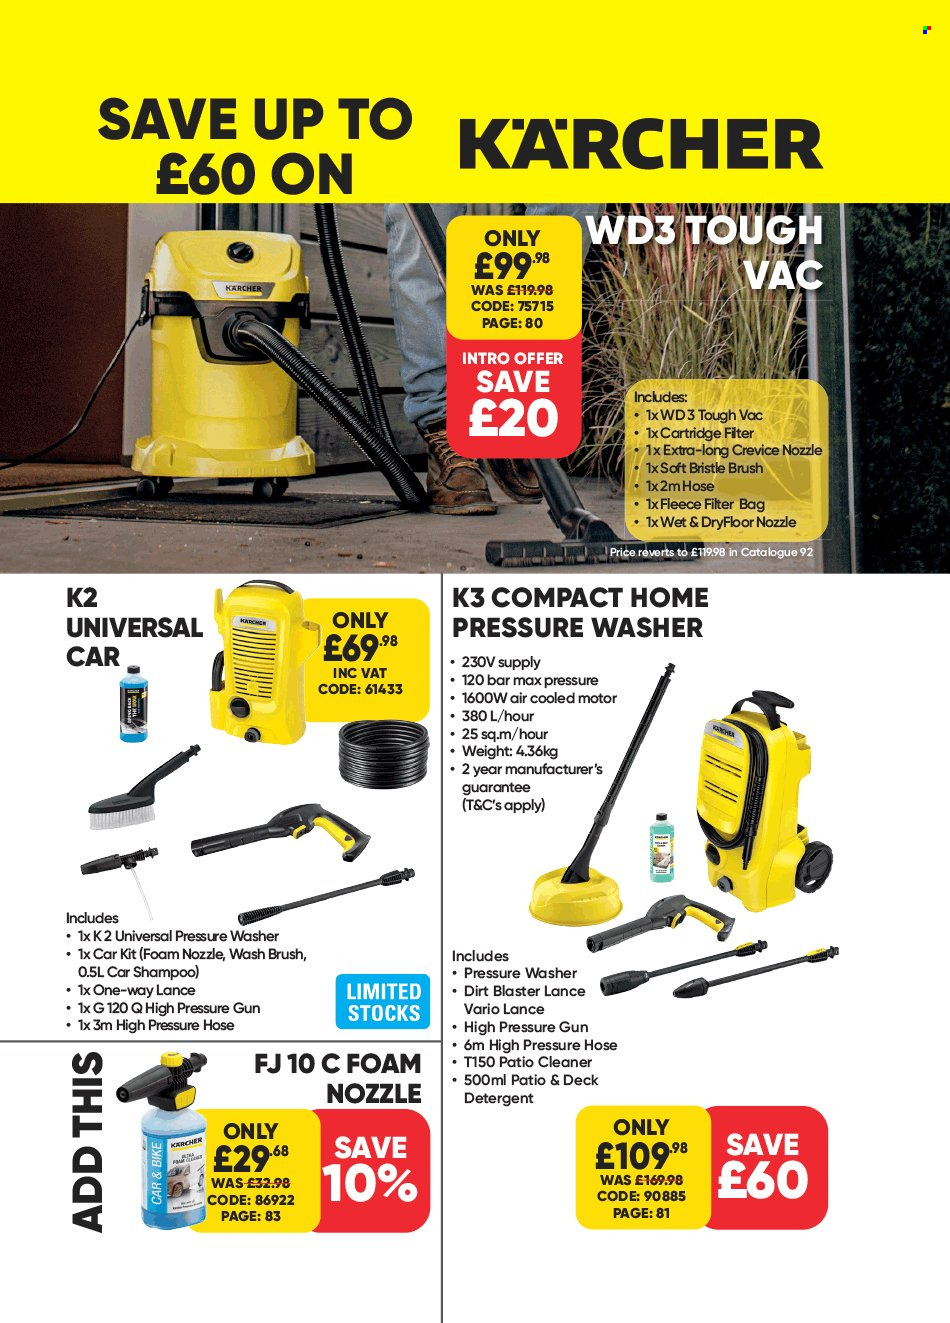 Toolstation offer . Page 72.